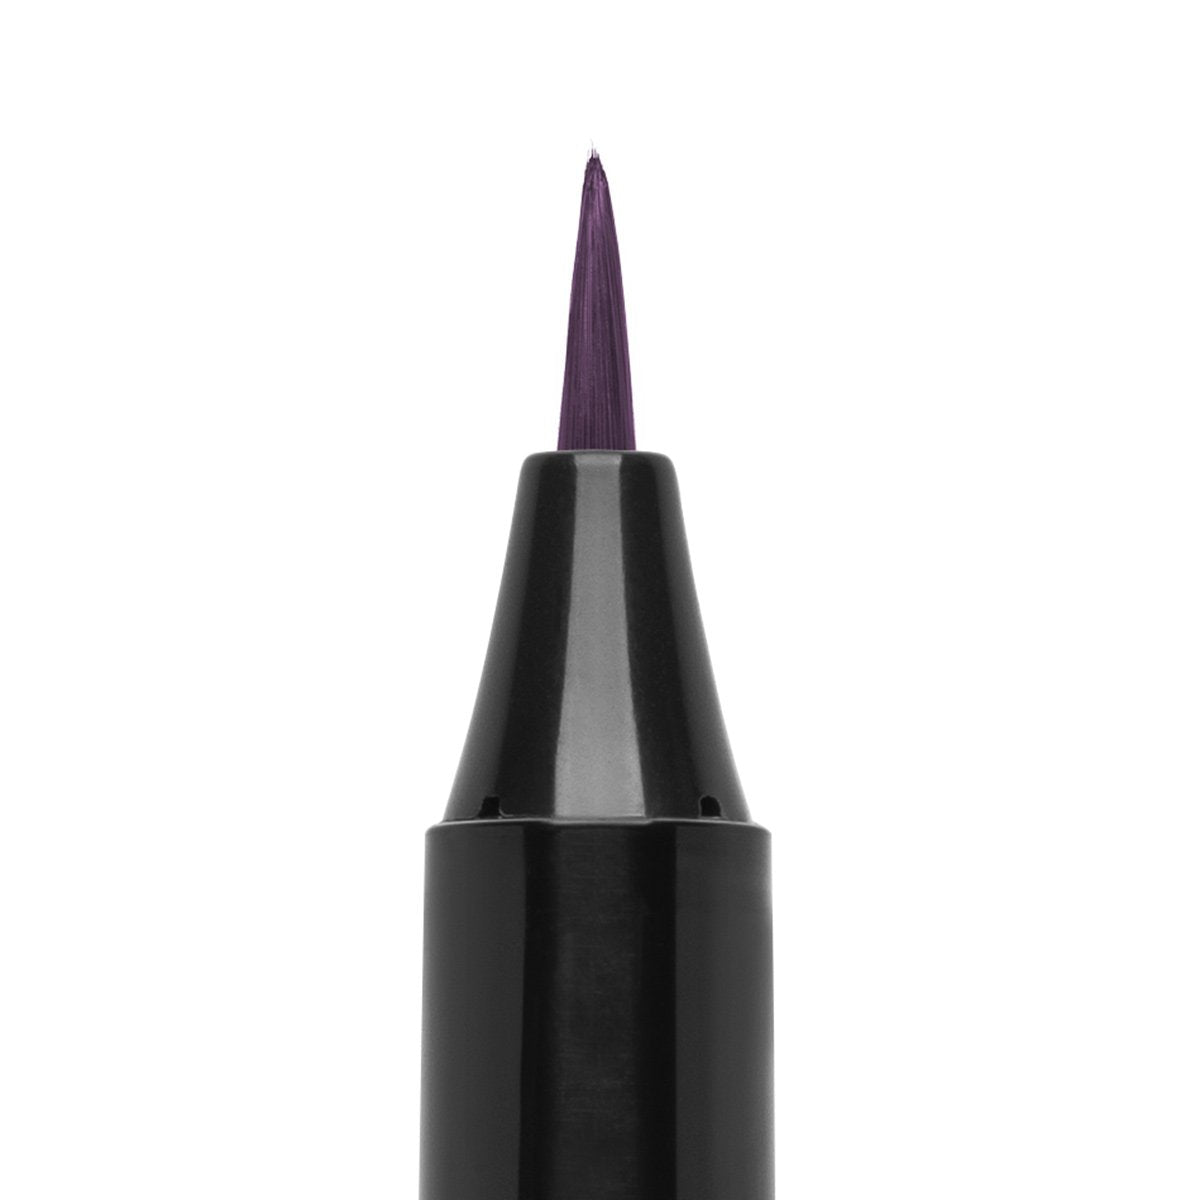 POUPRE - ROYAL PURPLE - long-wearing liquid eyeliner with precise brush tip in purple shade